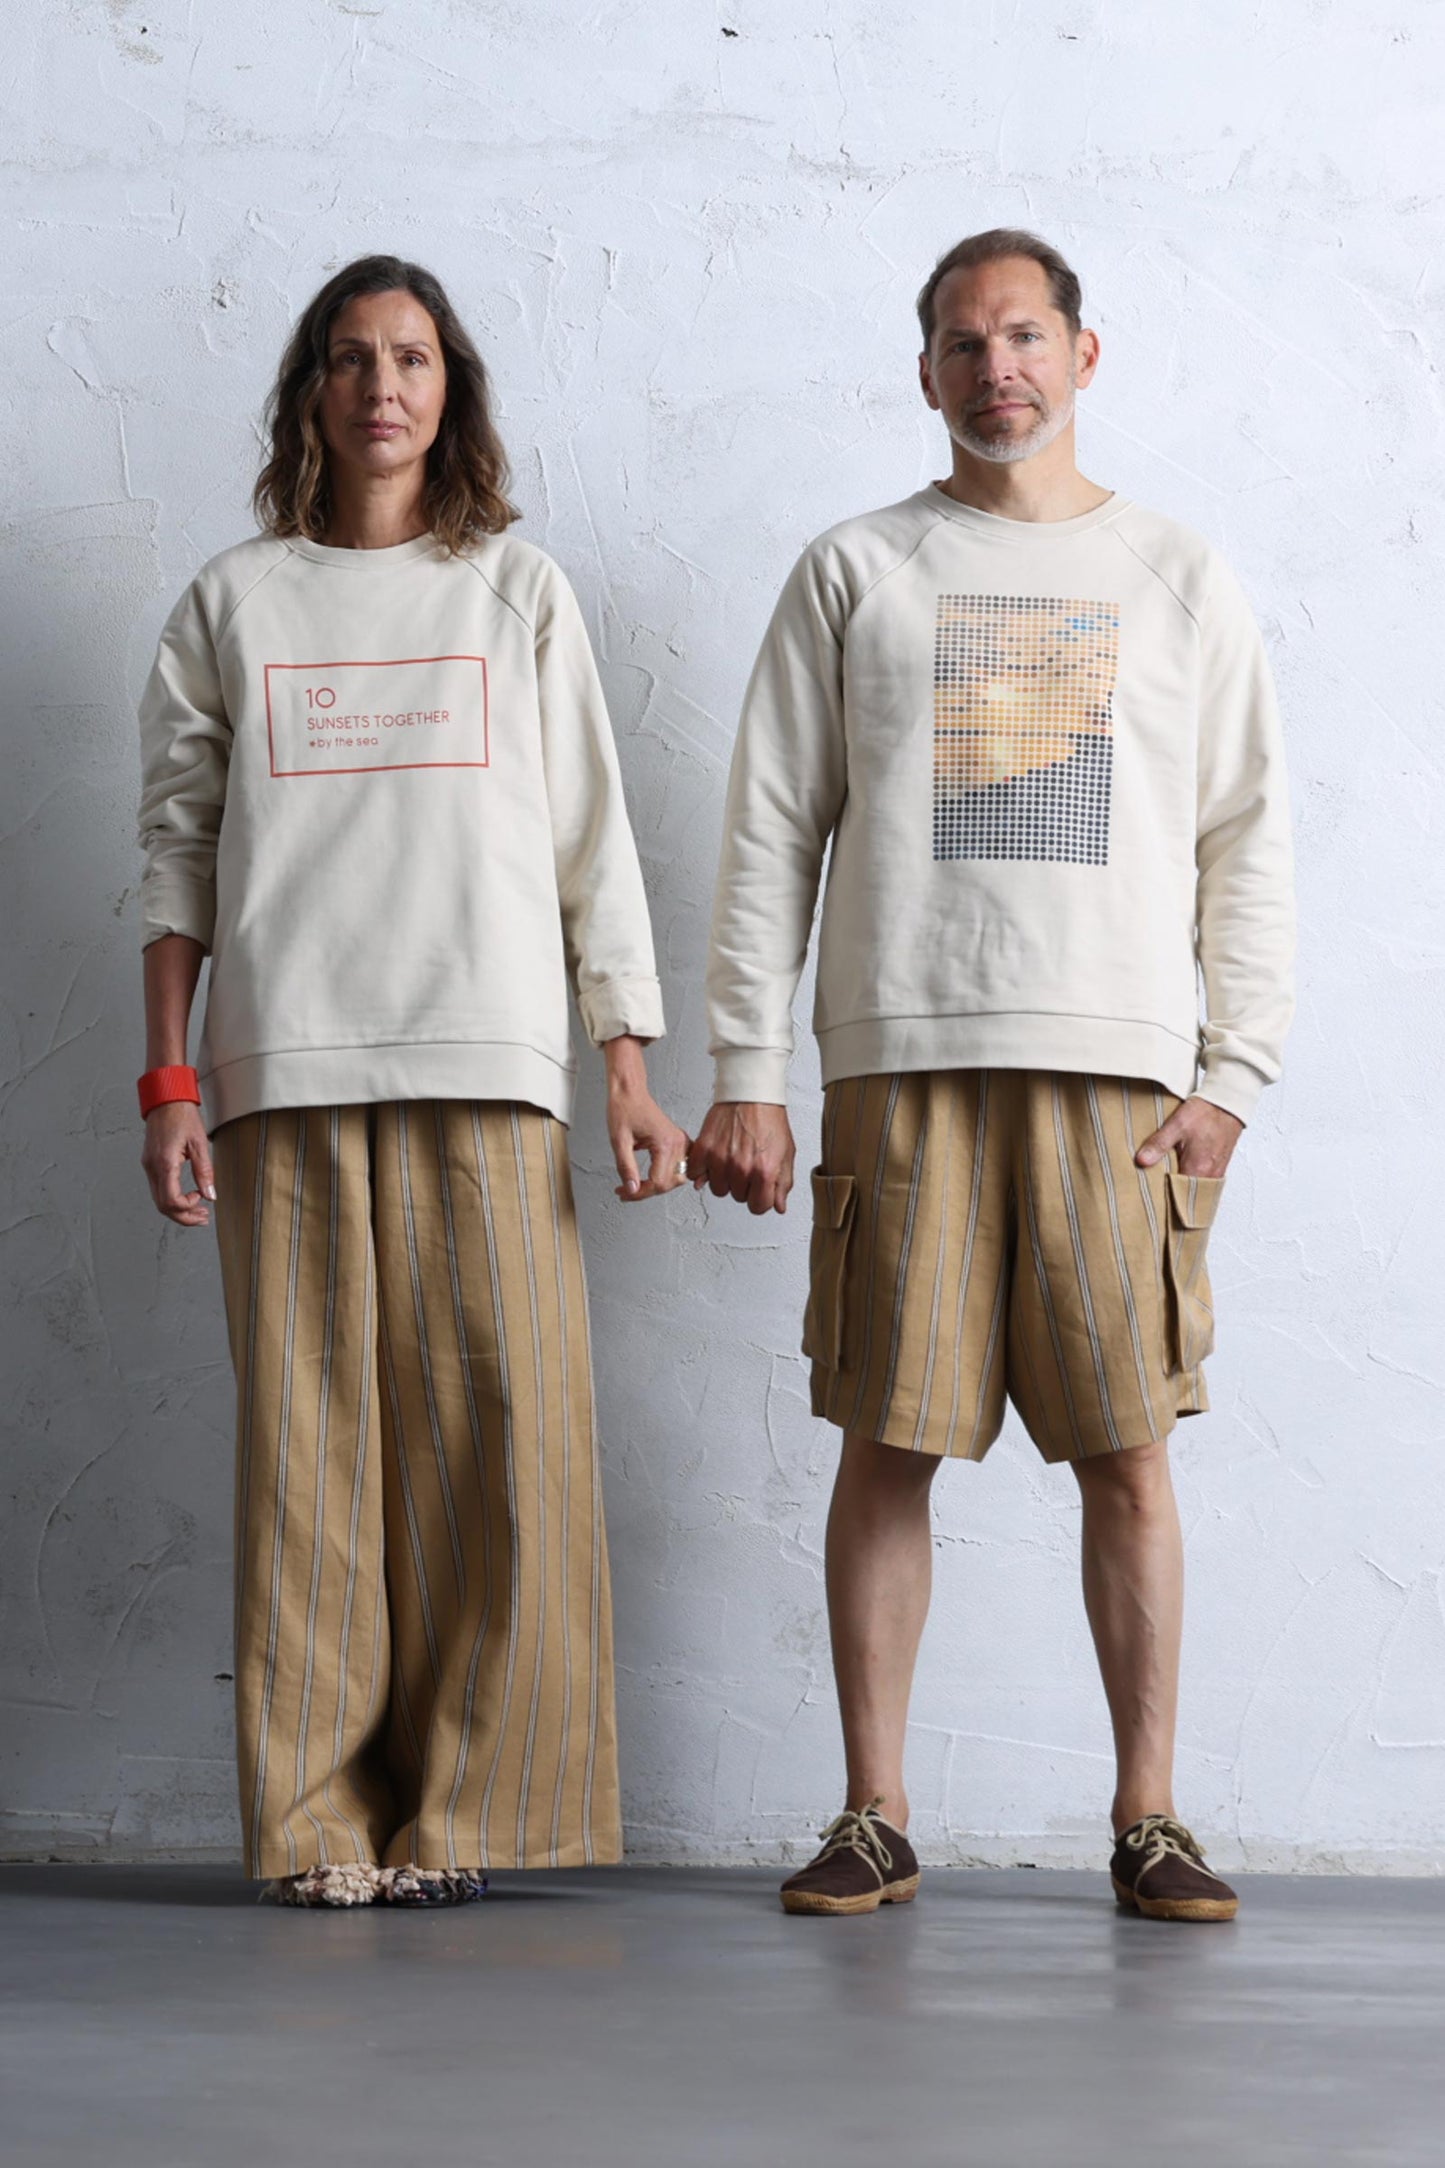 Couple wearing 10 to 10 Unisex sweatshirt with Dots print representing a sunset by the sea